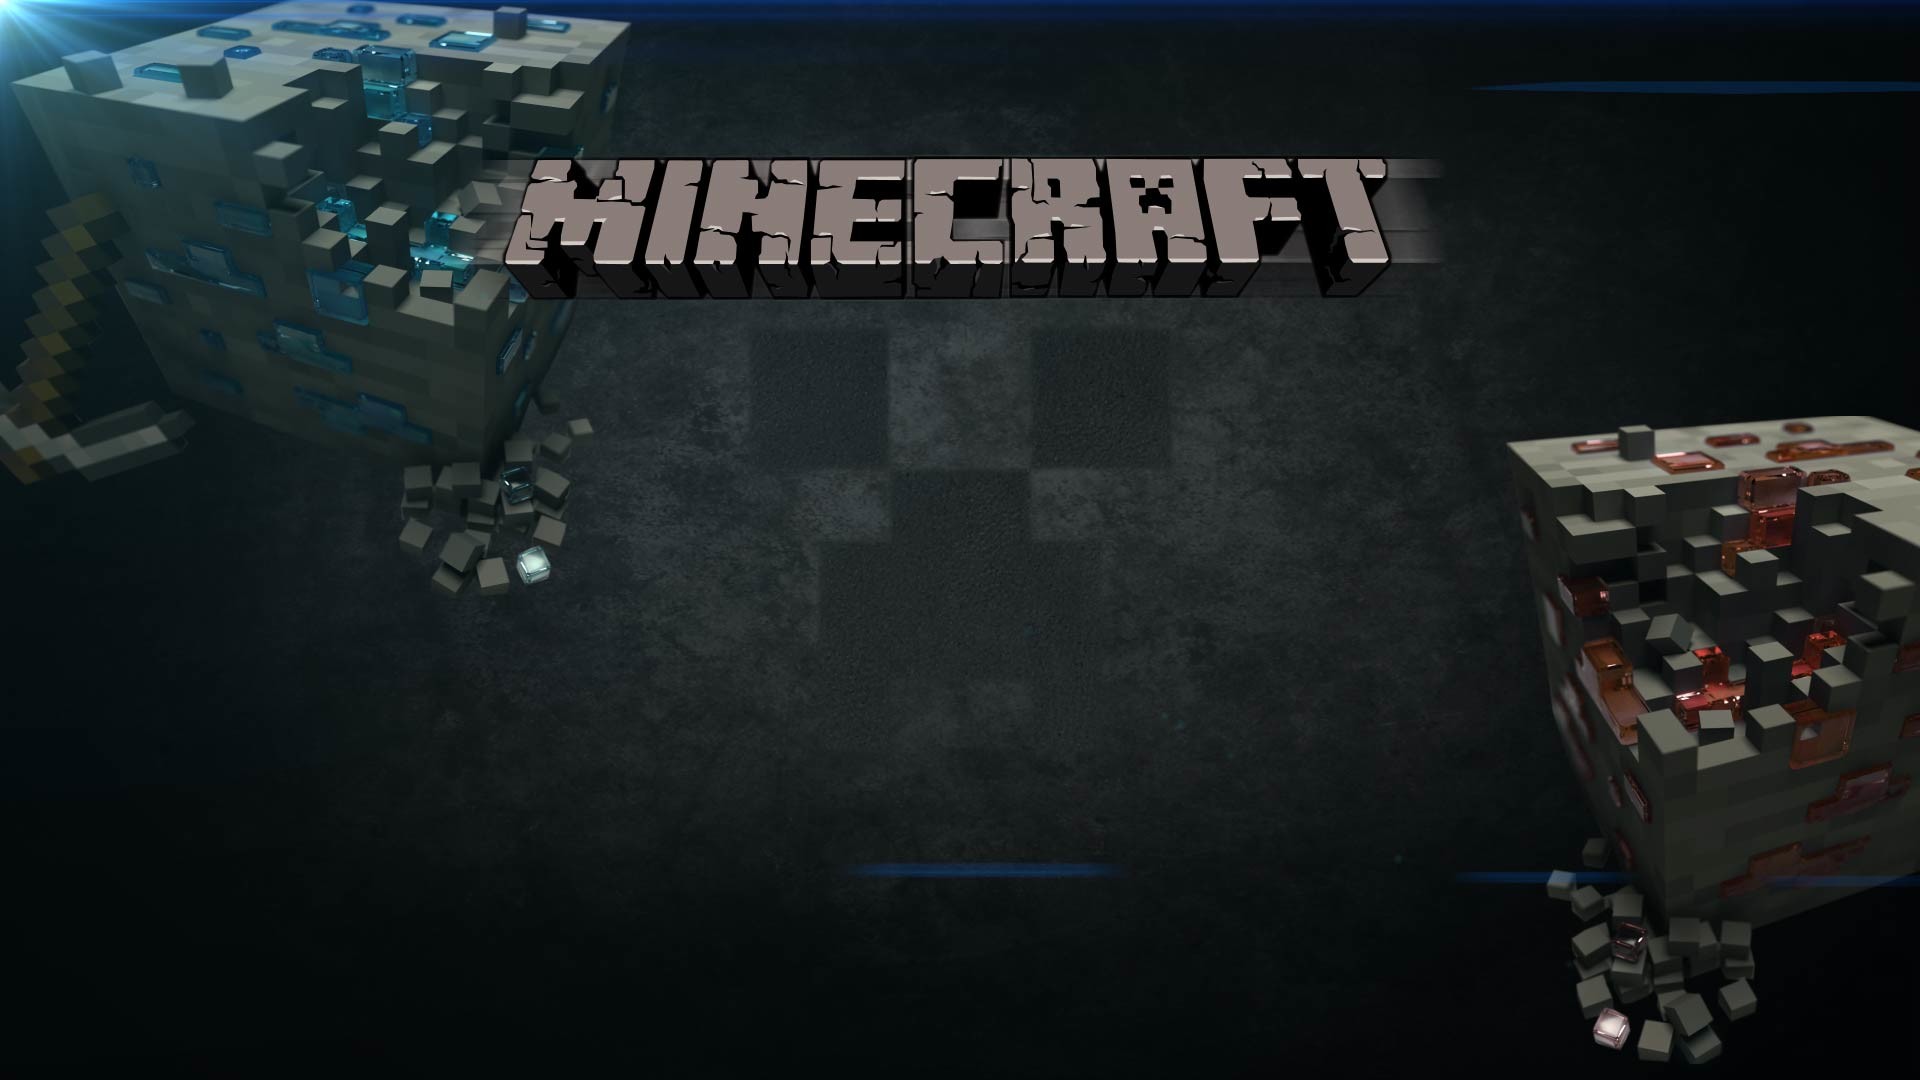 1920x1080 Free Awesome Minecraft Images on your Ipad